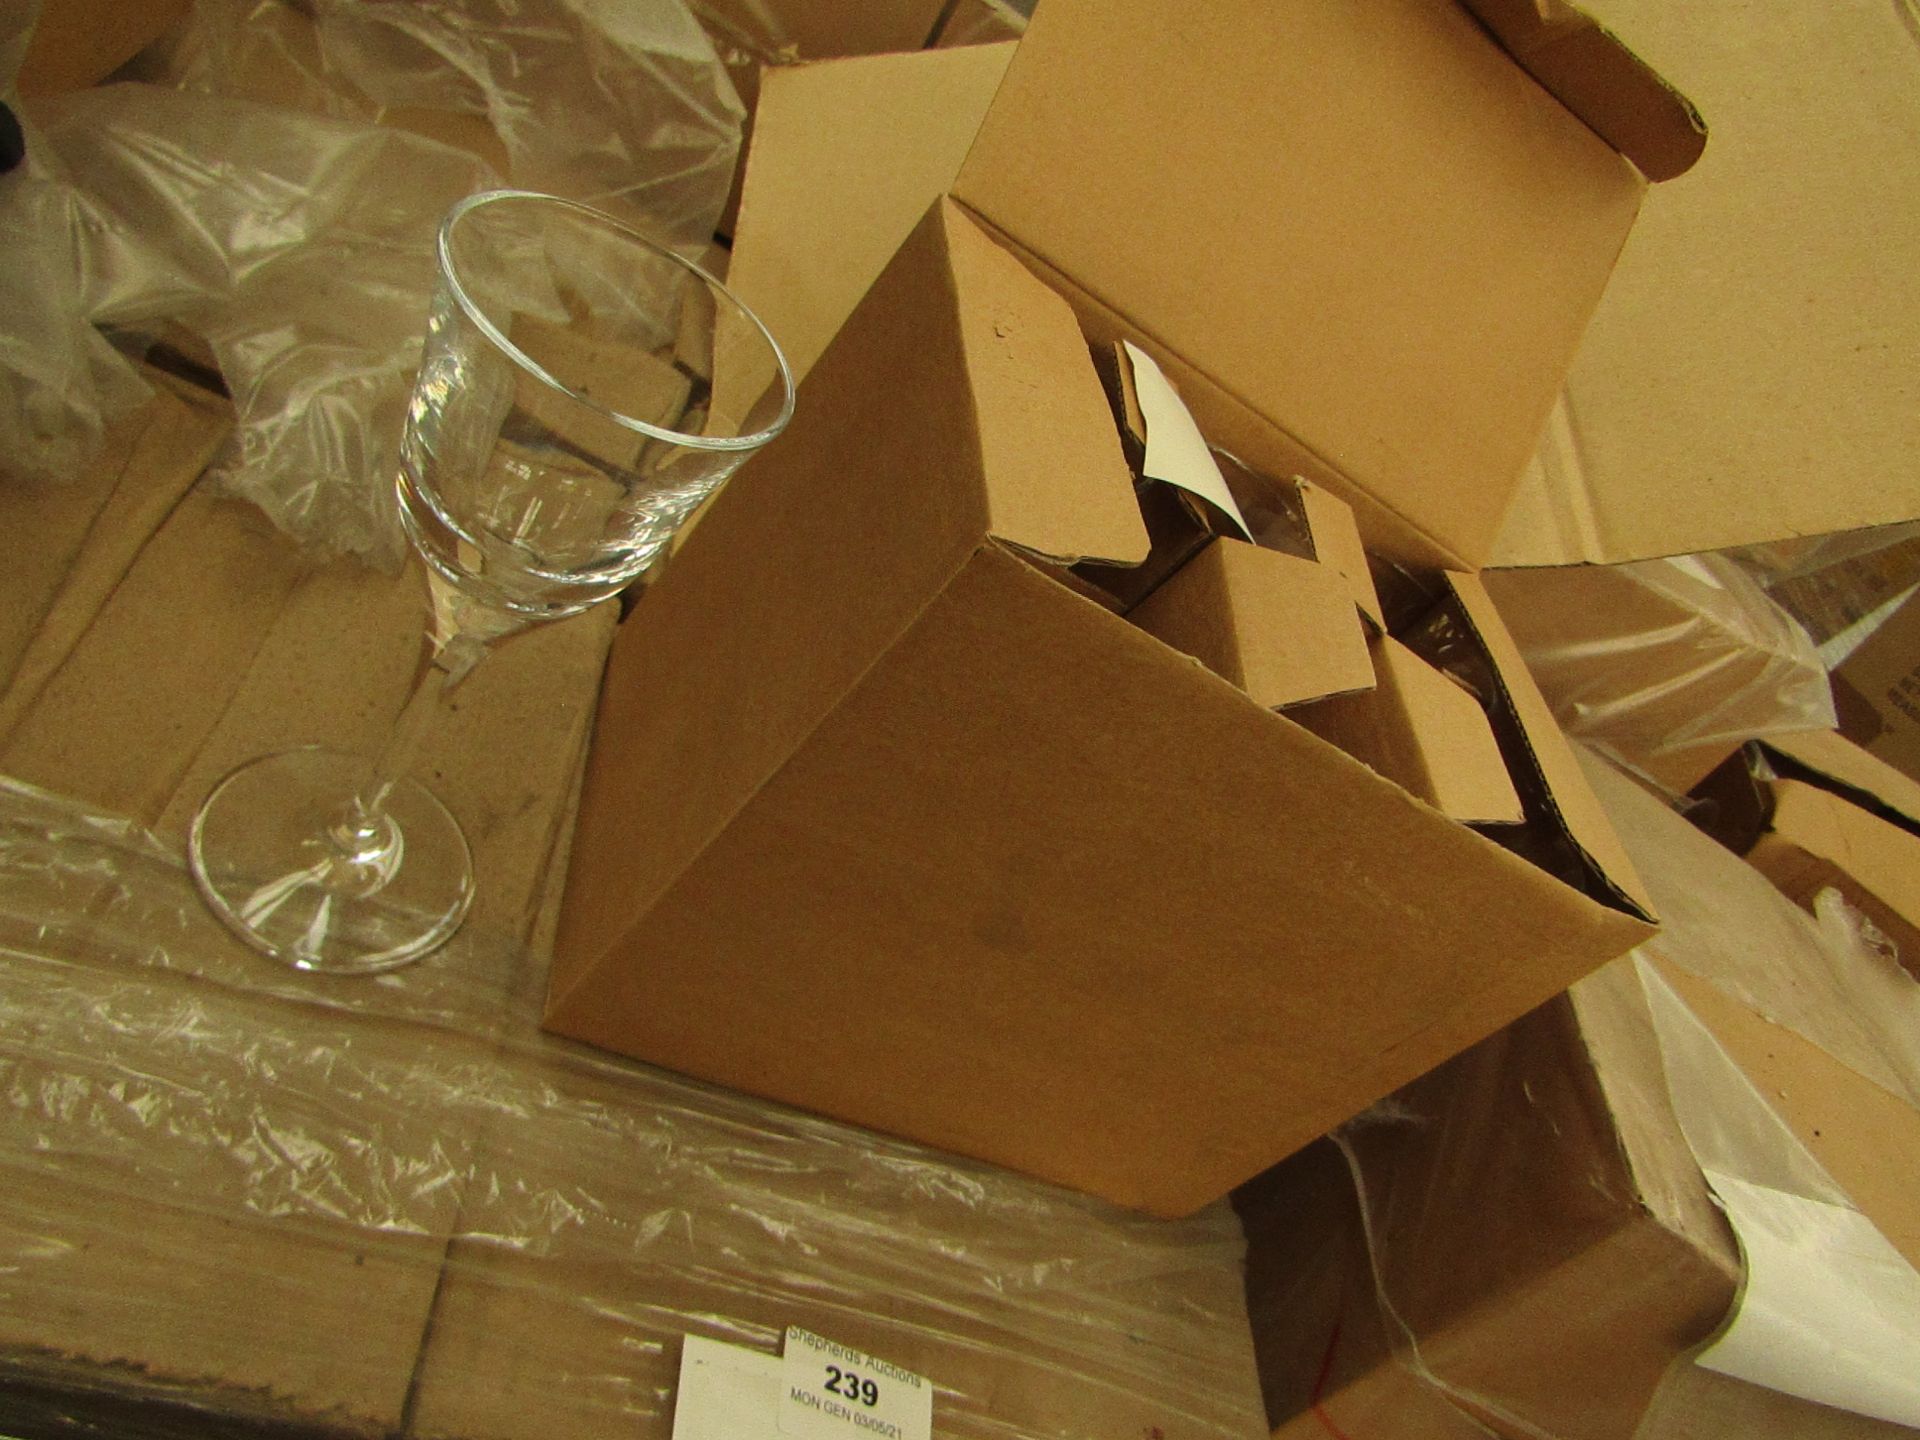 2x Boxes Containing 6 Pieces Per Box - Long Stem Sherry Glasses - All New & Boxed.